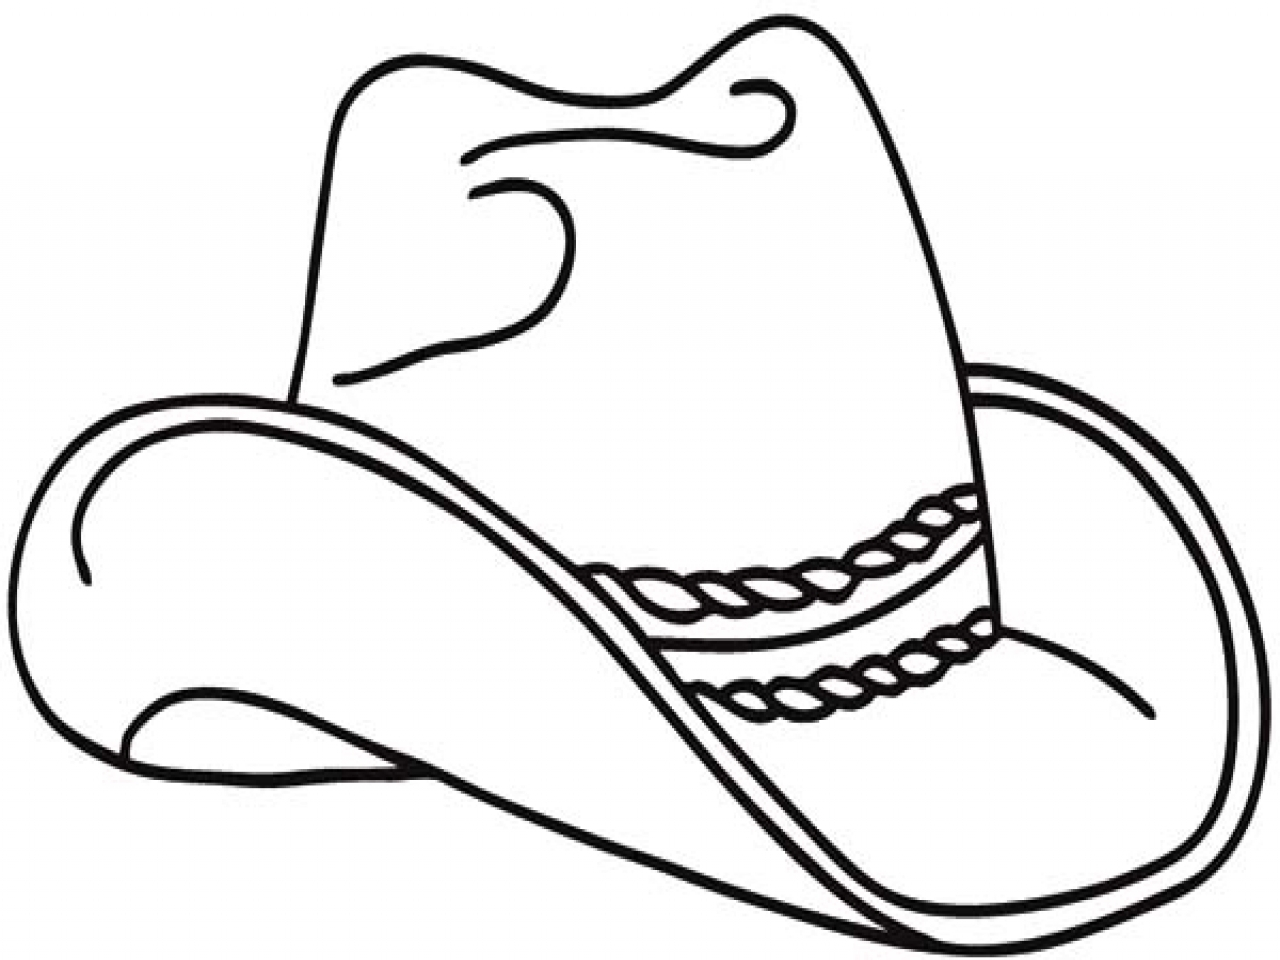 Cowboy Hat Coloring Pages Coloring Page Free Cowboy Hat Drawing Download Free Clip Art Free